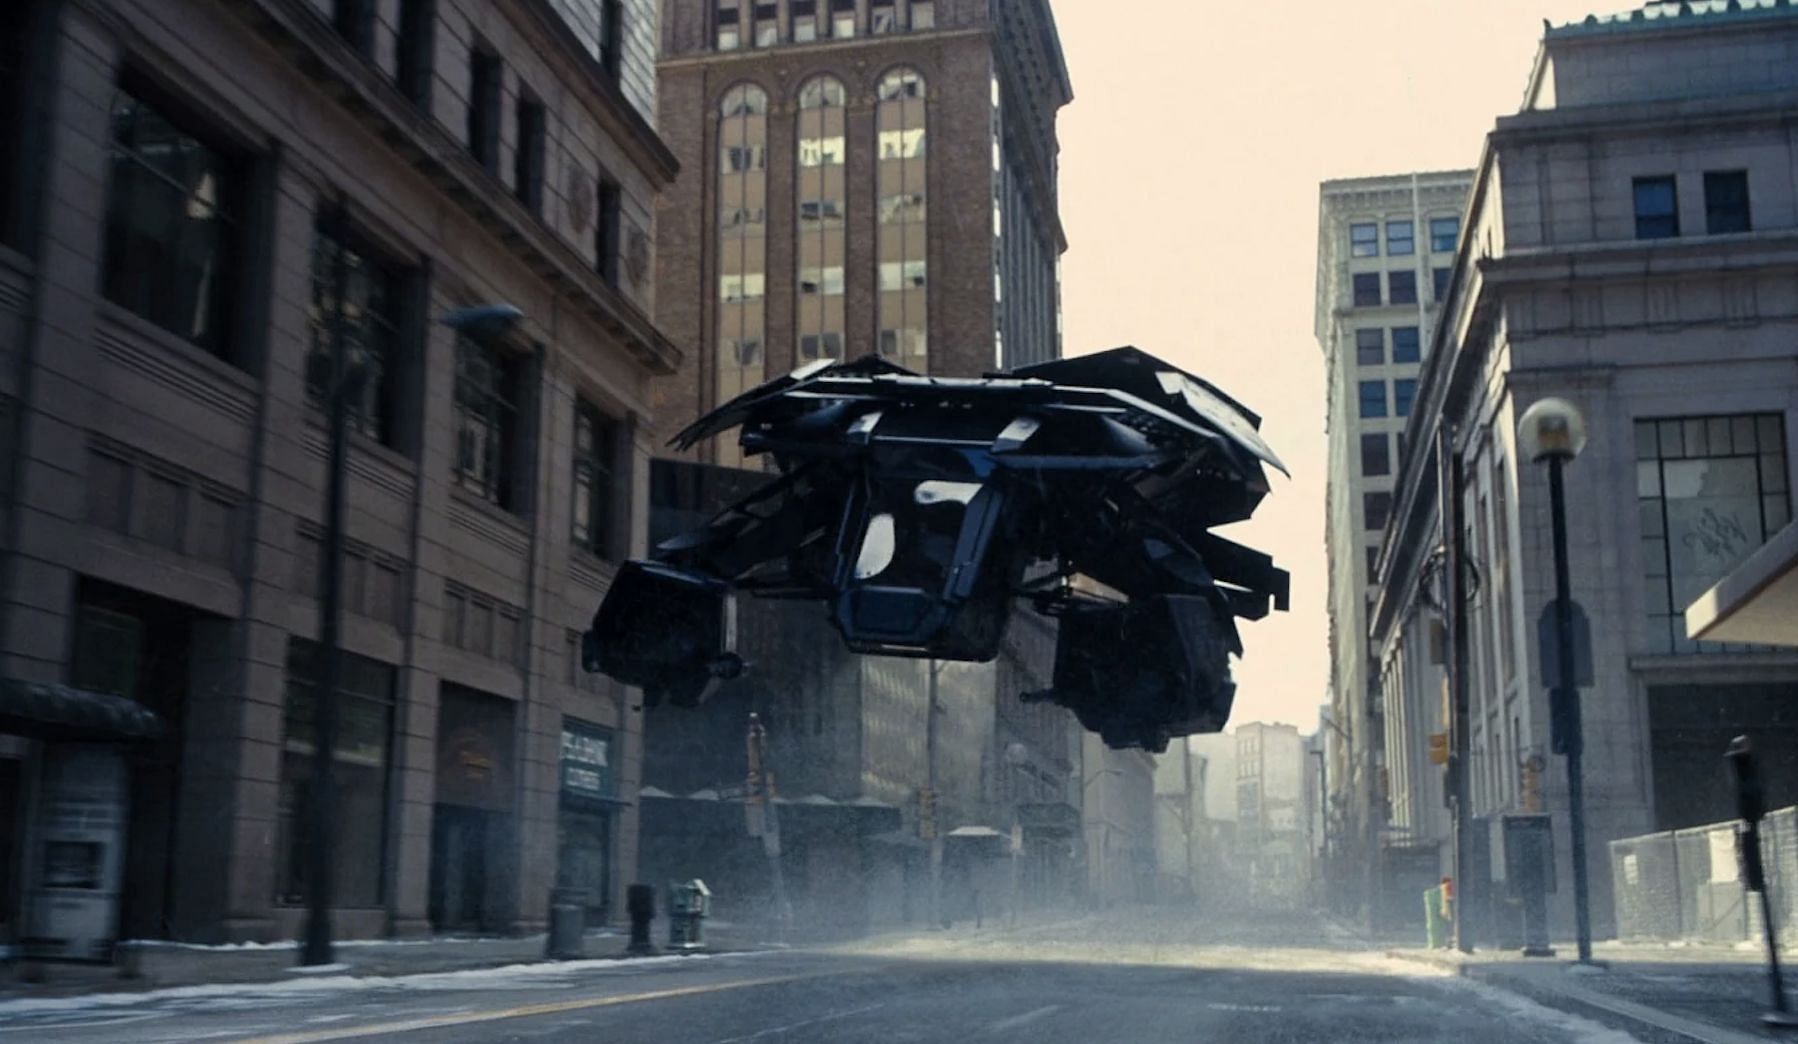 A high-tech flying vehicle designed by Bruce Wayne, equipped with advanced weaponry and technology (Image via Warner Bros)